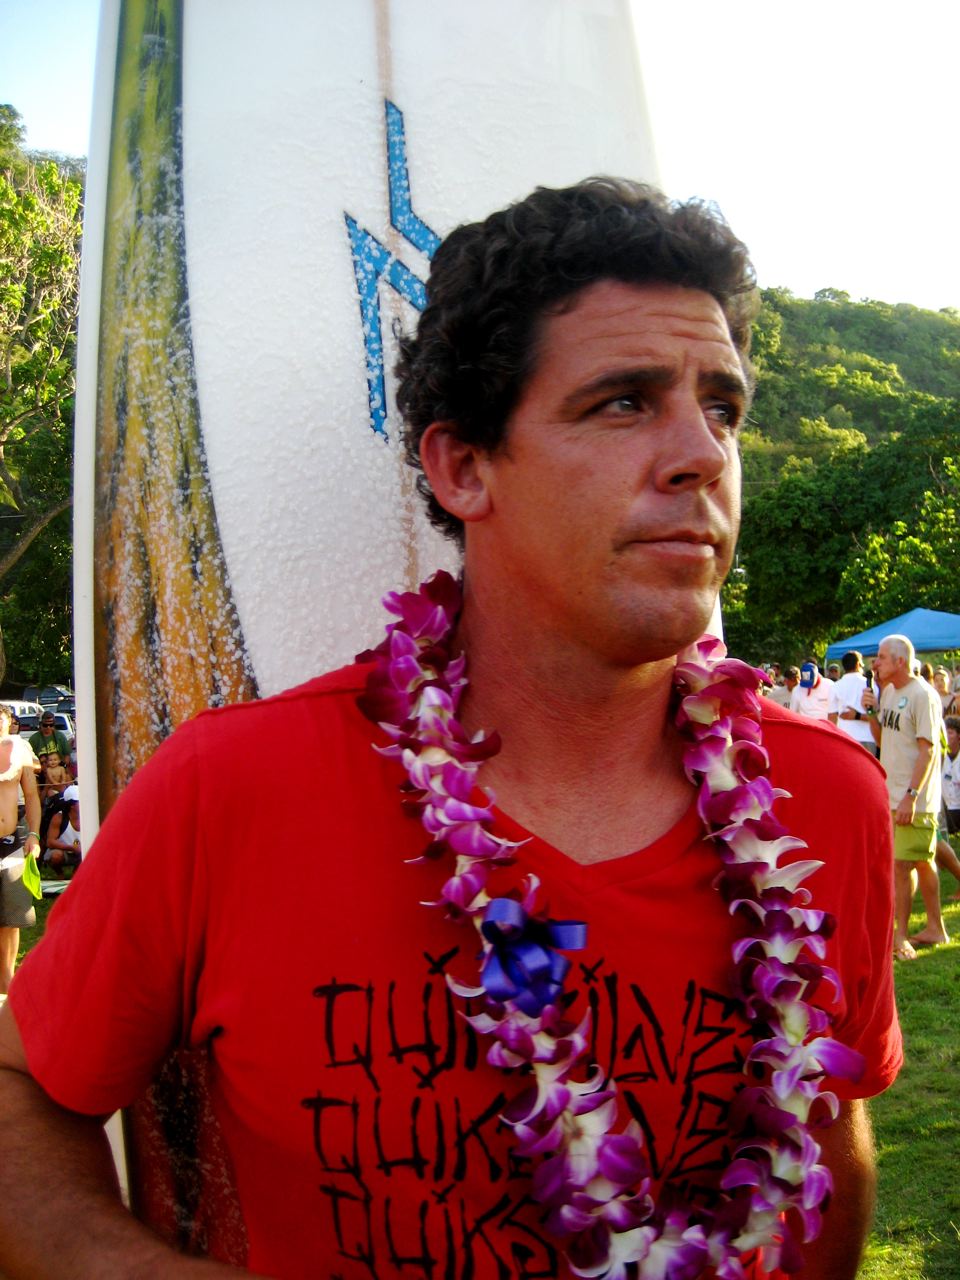 Peter Mel at Waimea Bay, Hawaii. Opening ceremony for The Quiksilver Eddie Aikau Big Wave Invitational.